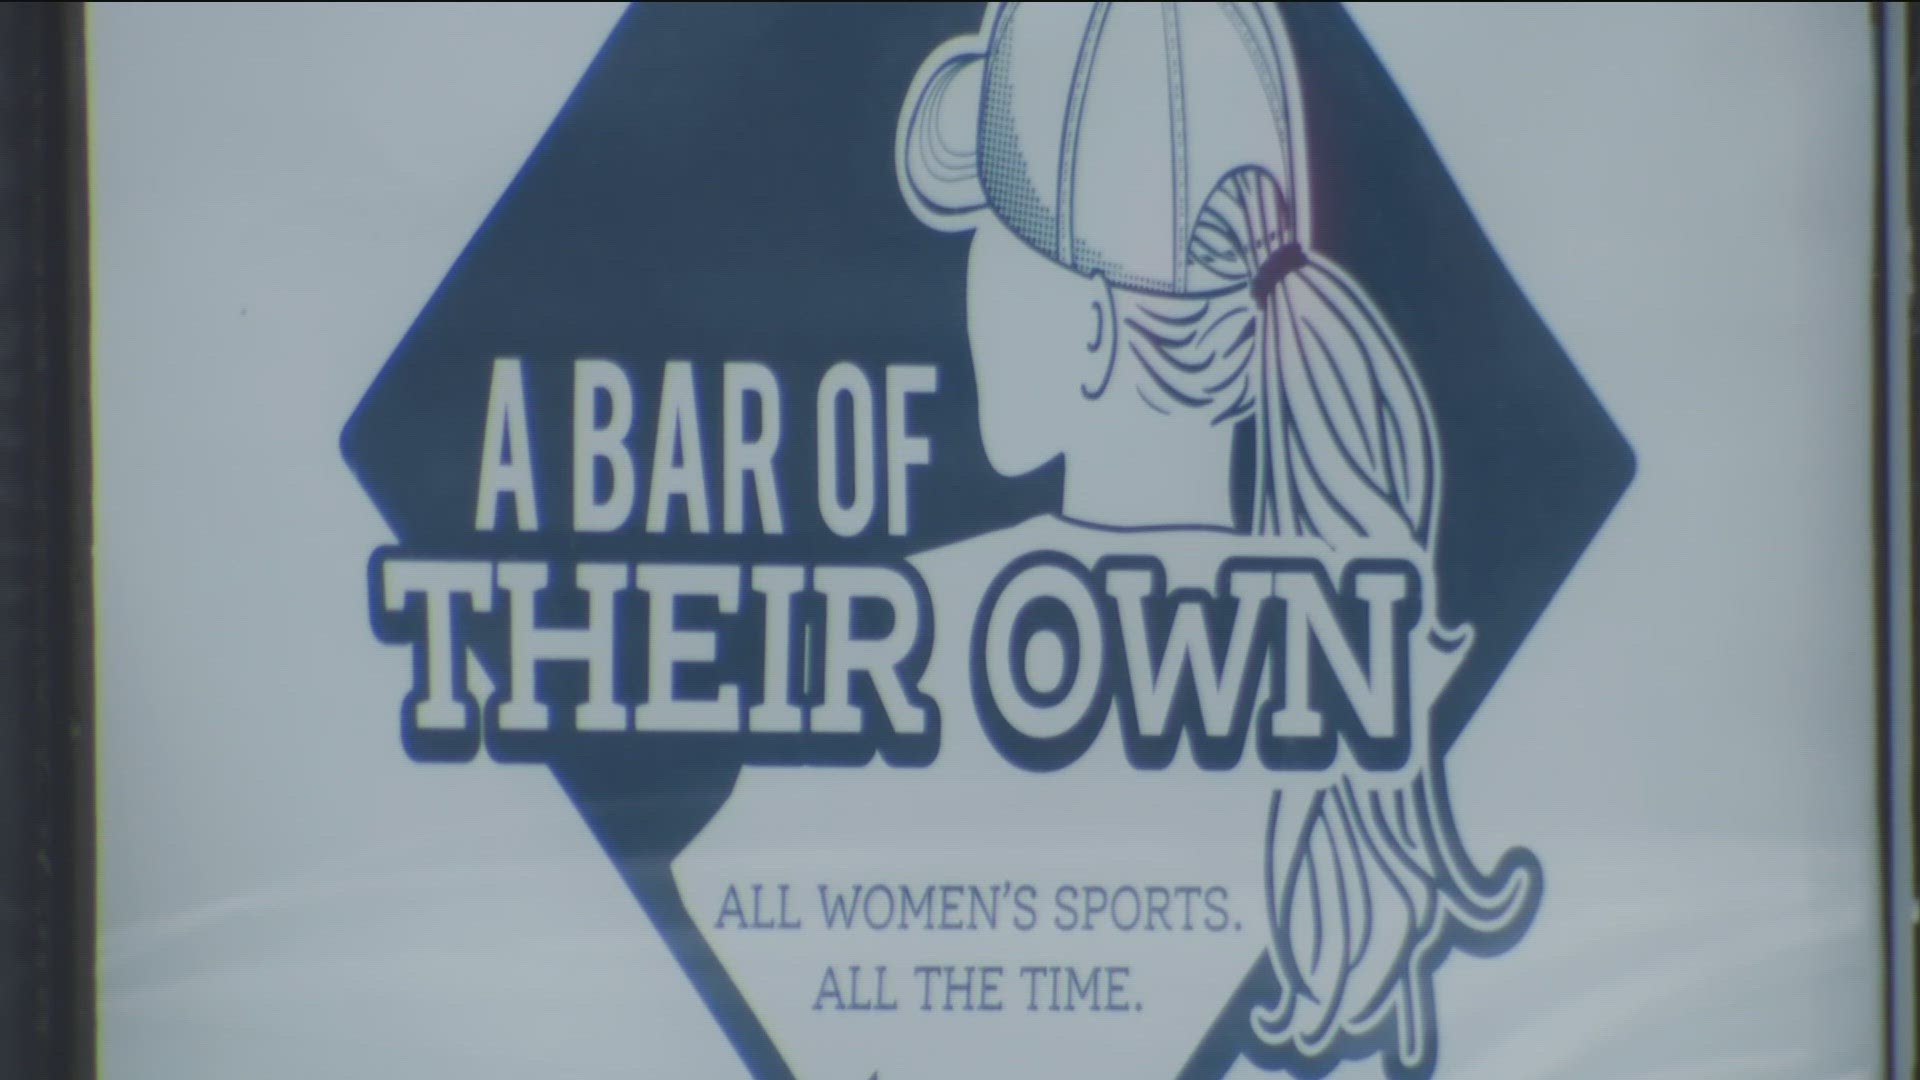 A Bar of Their Own opens two days after basketball phenom Caitlin Clark and the Hawkeyes take on the Gophers in front of a sold out crowd at Williams Arena.